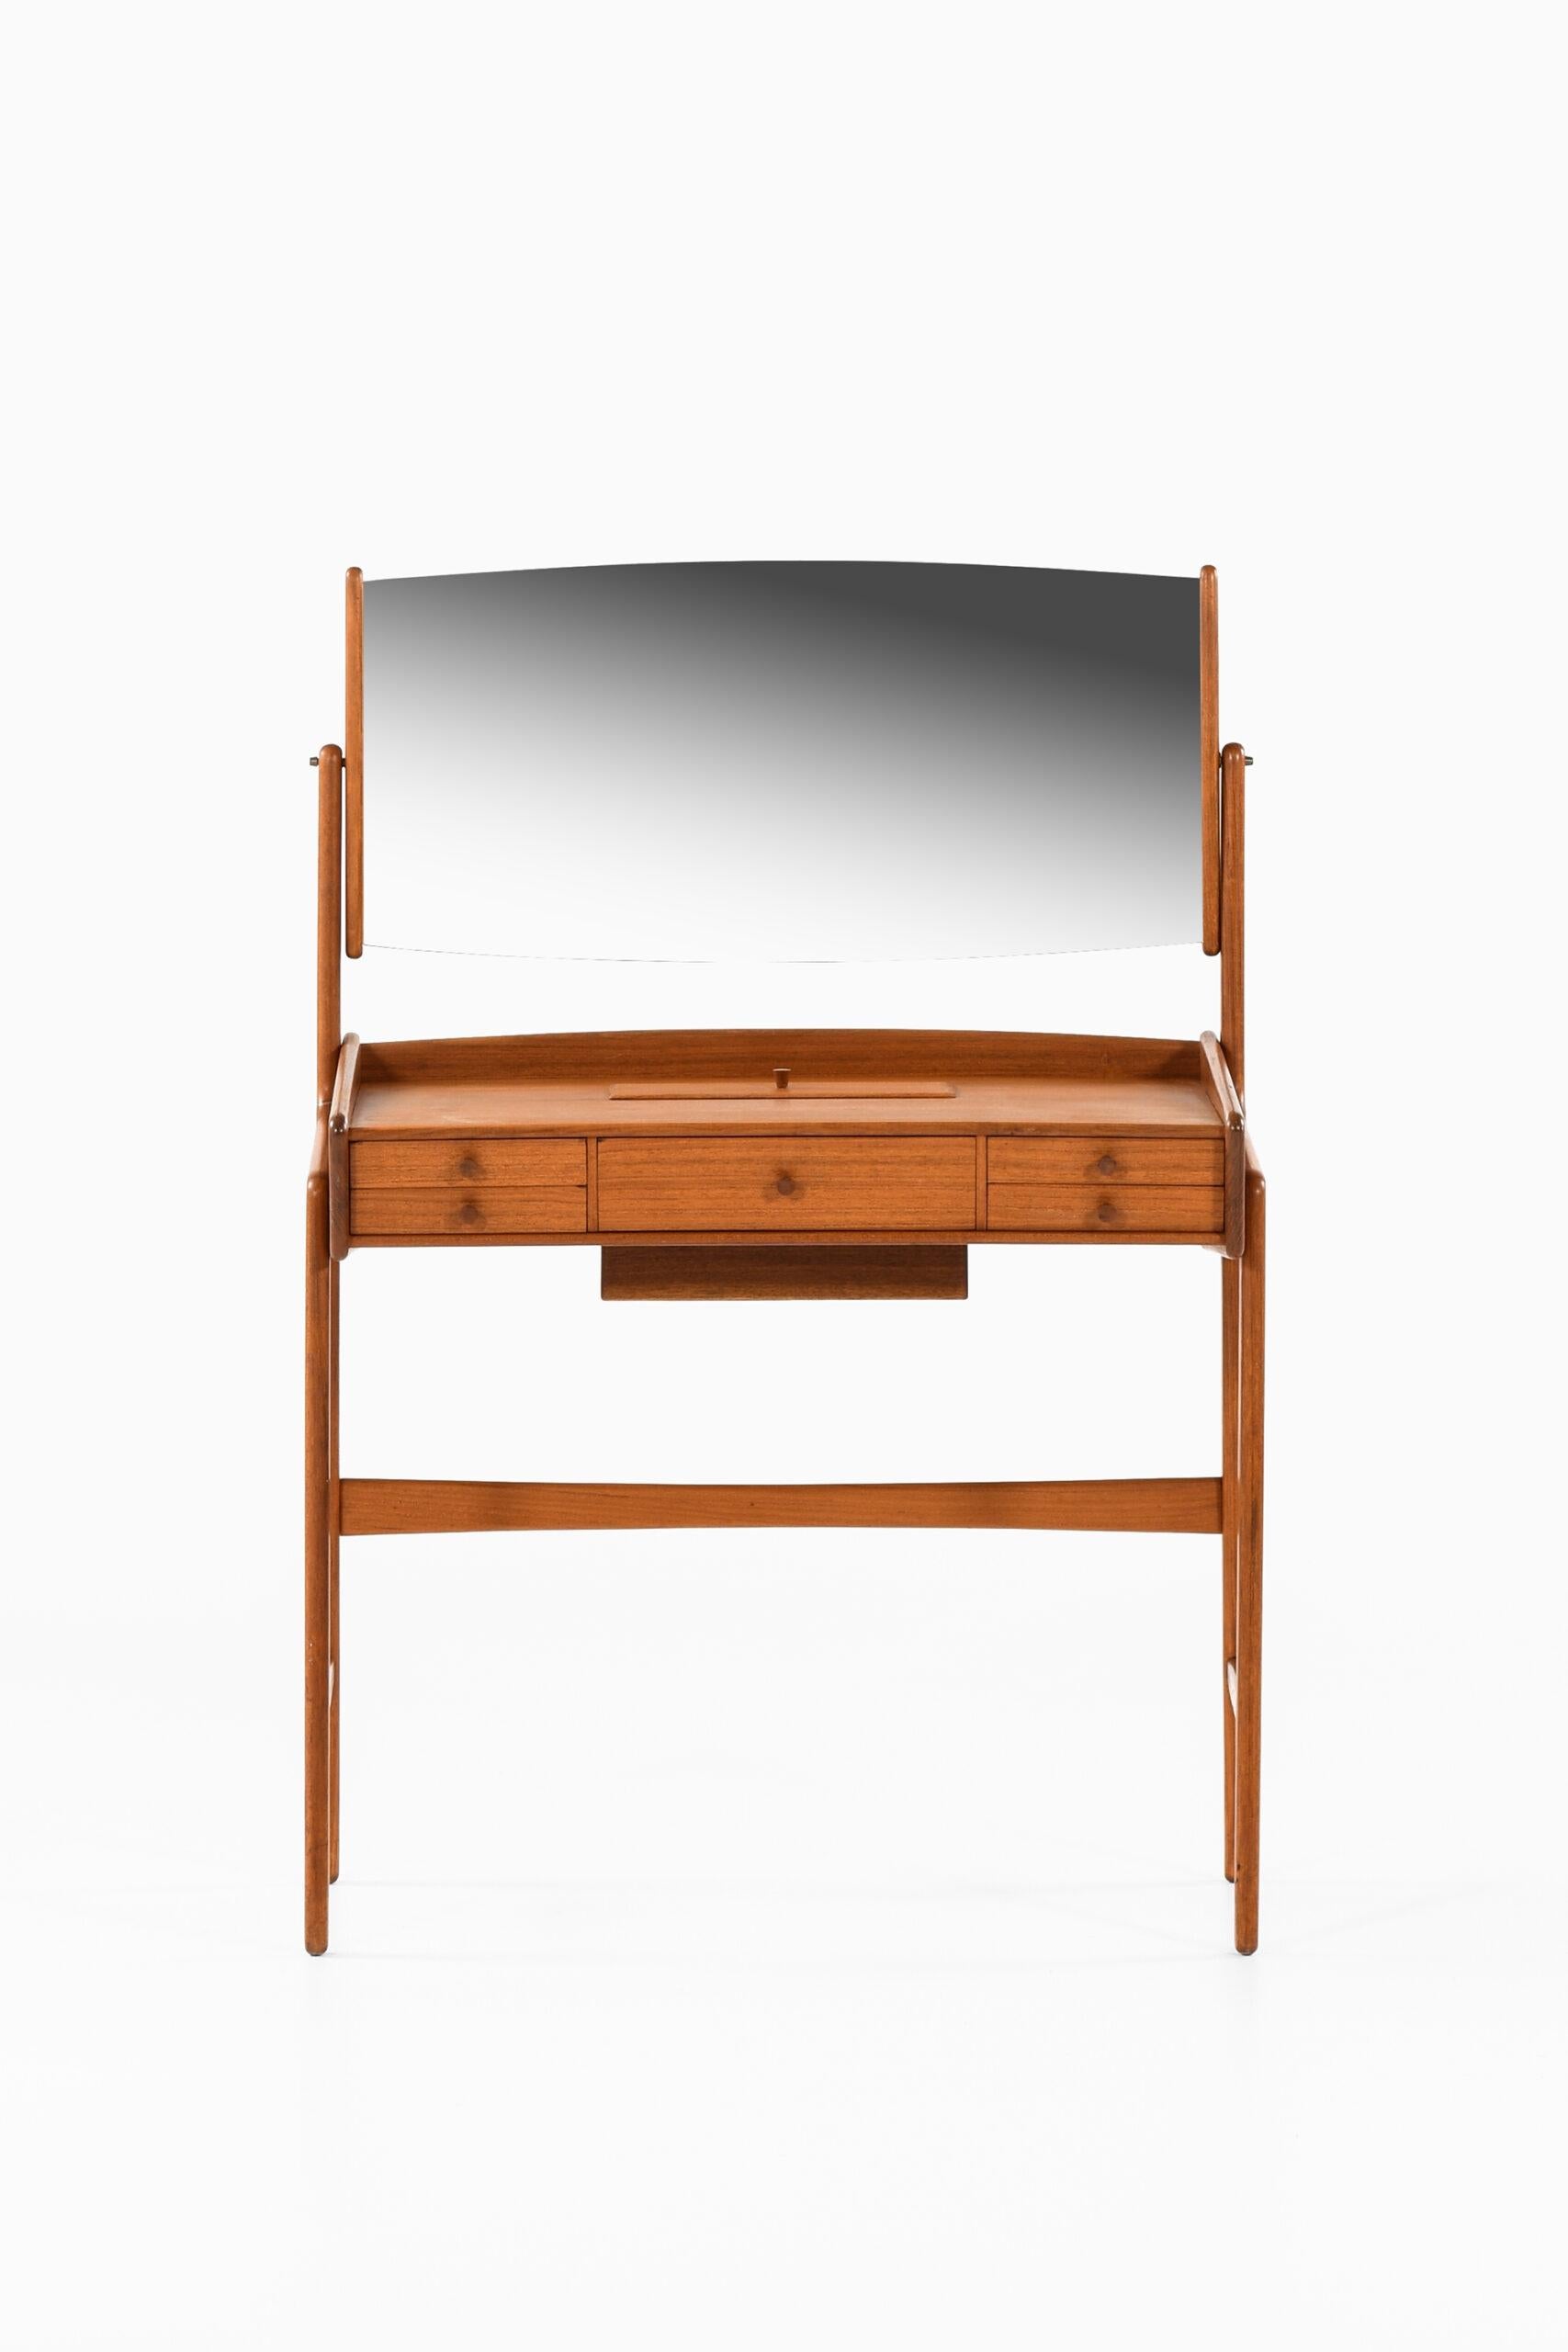 Rare vanity attributed to Svend Aage Madsen. Produced in Denmark.
Dimensions (W x D x H): 81 x 45 x 112,5 ( 68 ) cm.